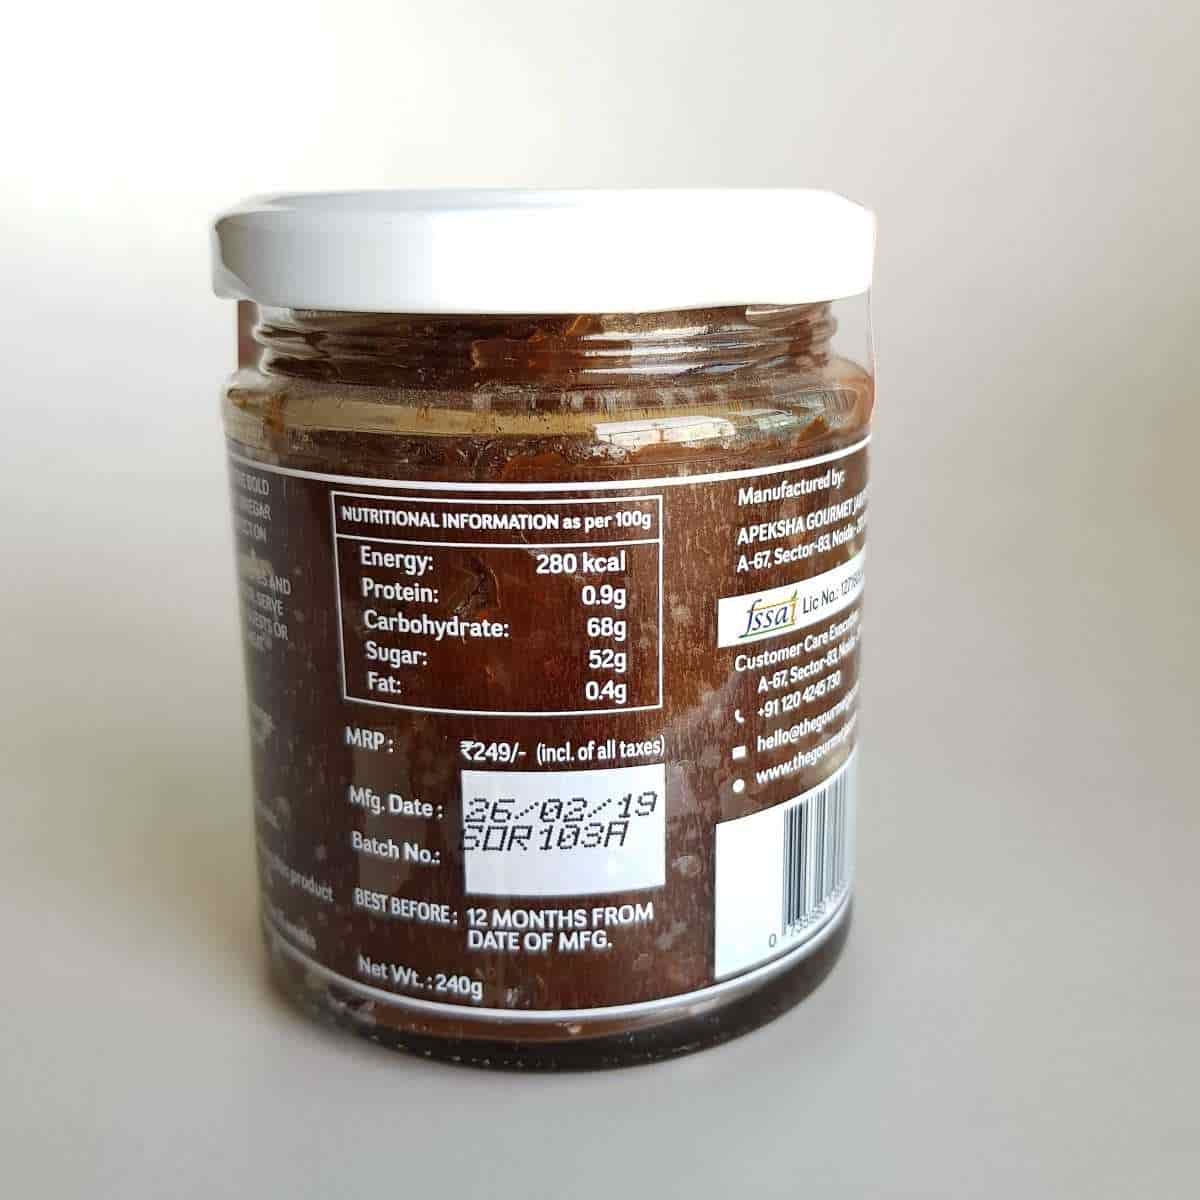 The Gourmet Jar Spicy Onion Relish